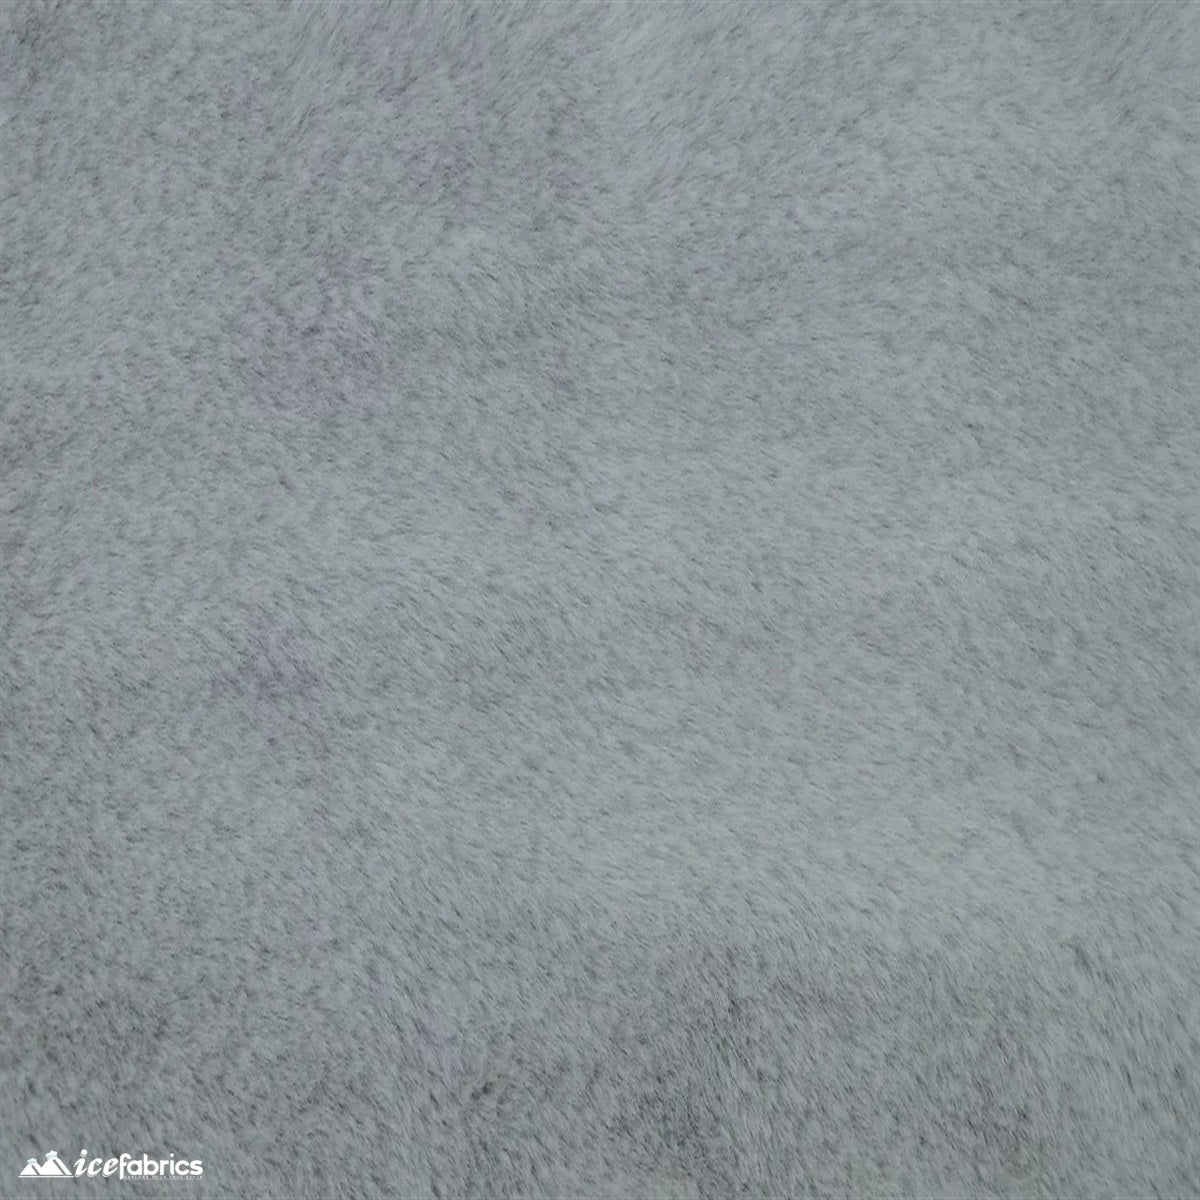 Bunny Thick Faux Fur Minky Fabric / Short Pile / Super SoftICE FABRICSICE FABRICSPlatinumBy The Yard (60 inches Wide)Bunny Thick Faux Fur Minky Fabric / Short Pile / Super Soft ICE FABRICS Platinum